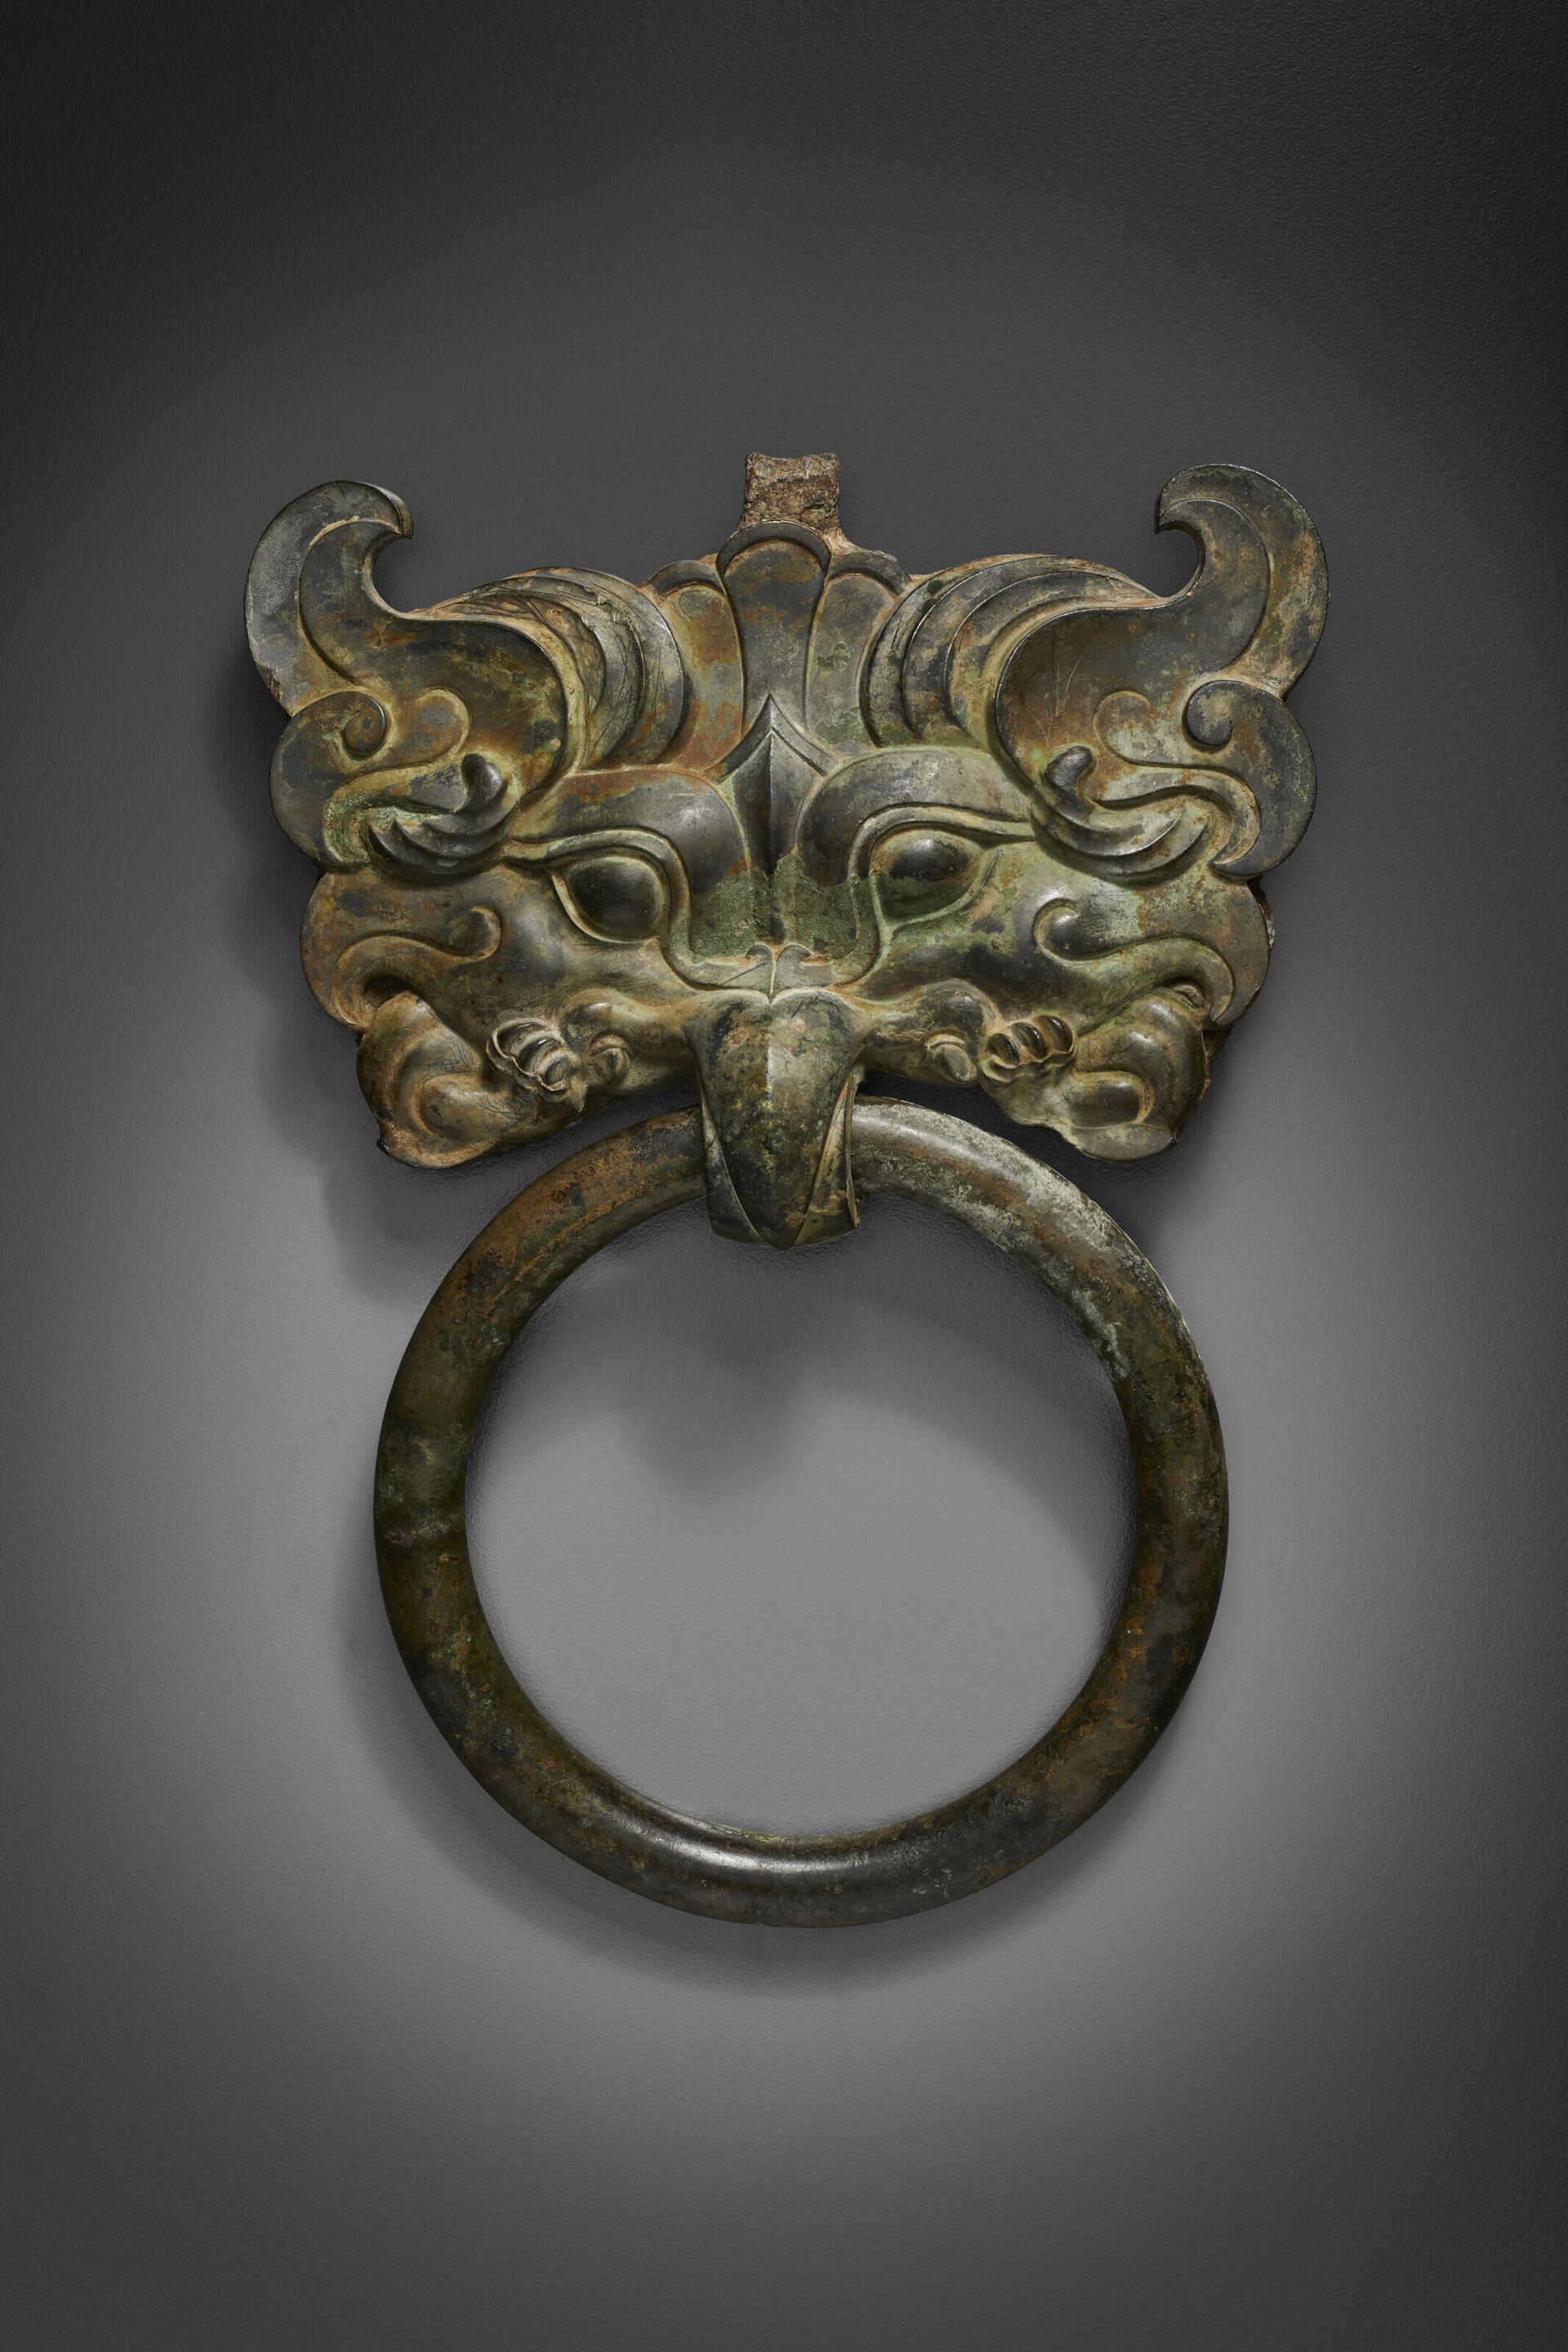 A BRONZE TAOTIE MASK FITTING WITH RING HANDLE